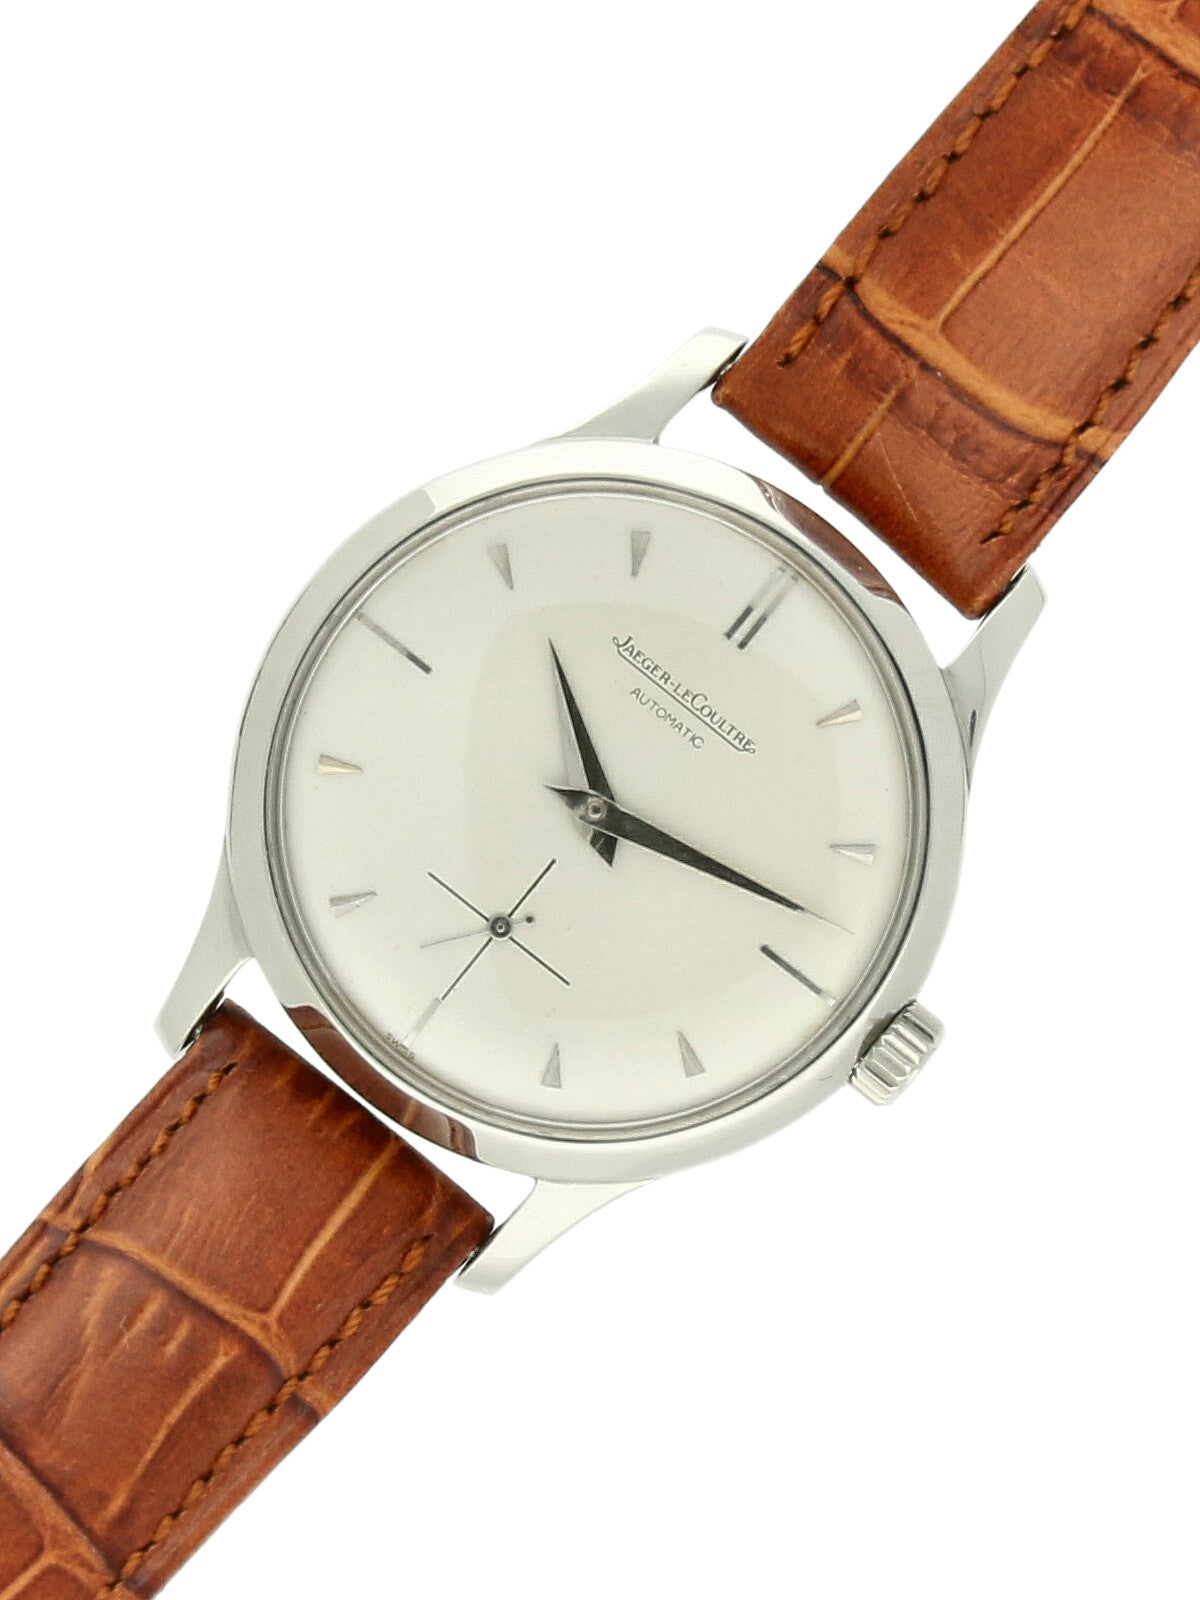 Pre Owned Jaeger LeCoultre Steel Automatic 34mm Watch on Brown Leather Strap